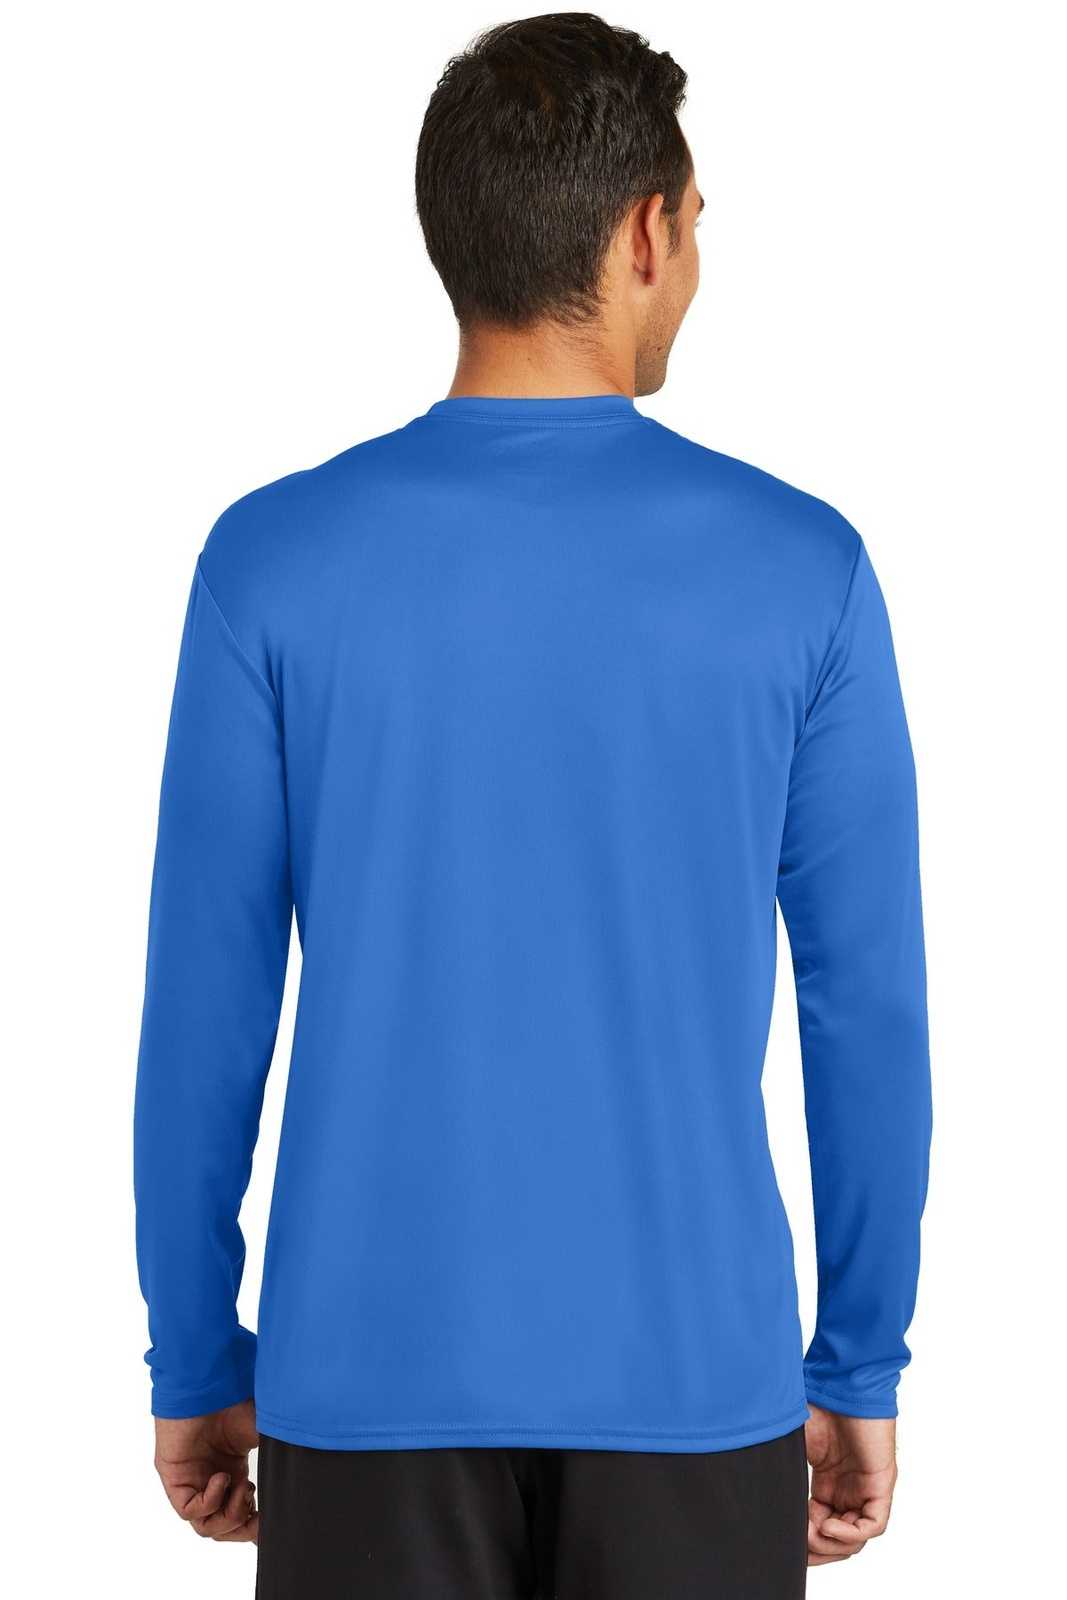 Port &amp; Company PC380LS Long Sleeve Performance Tee - Royal - HIT a Double - 2